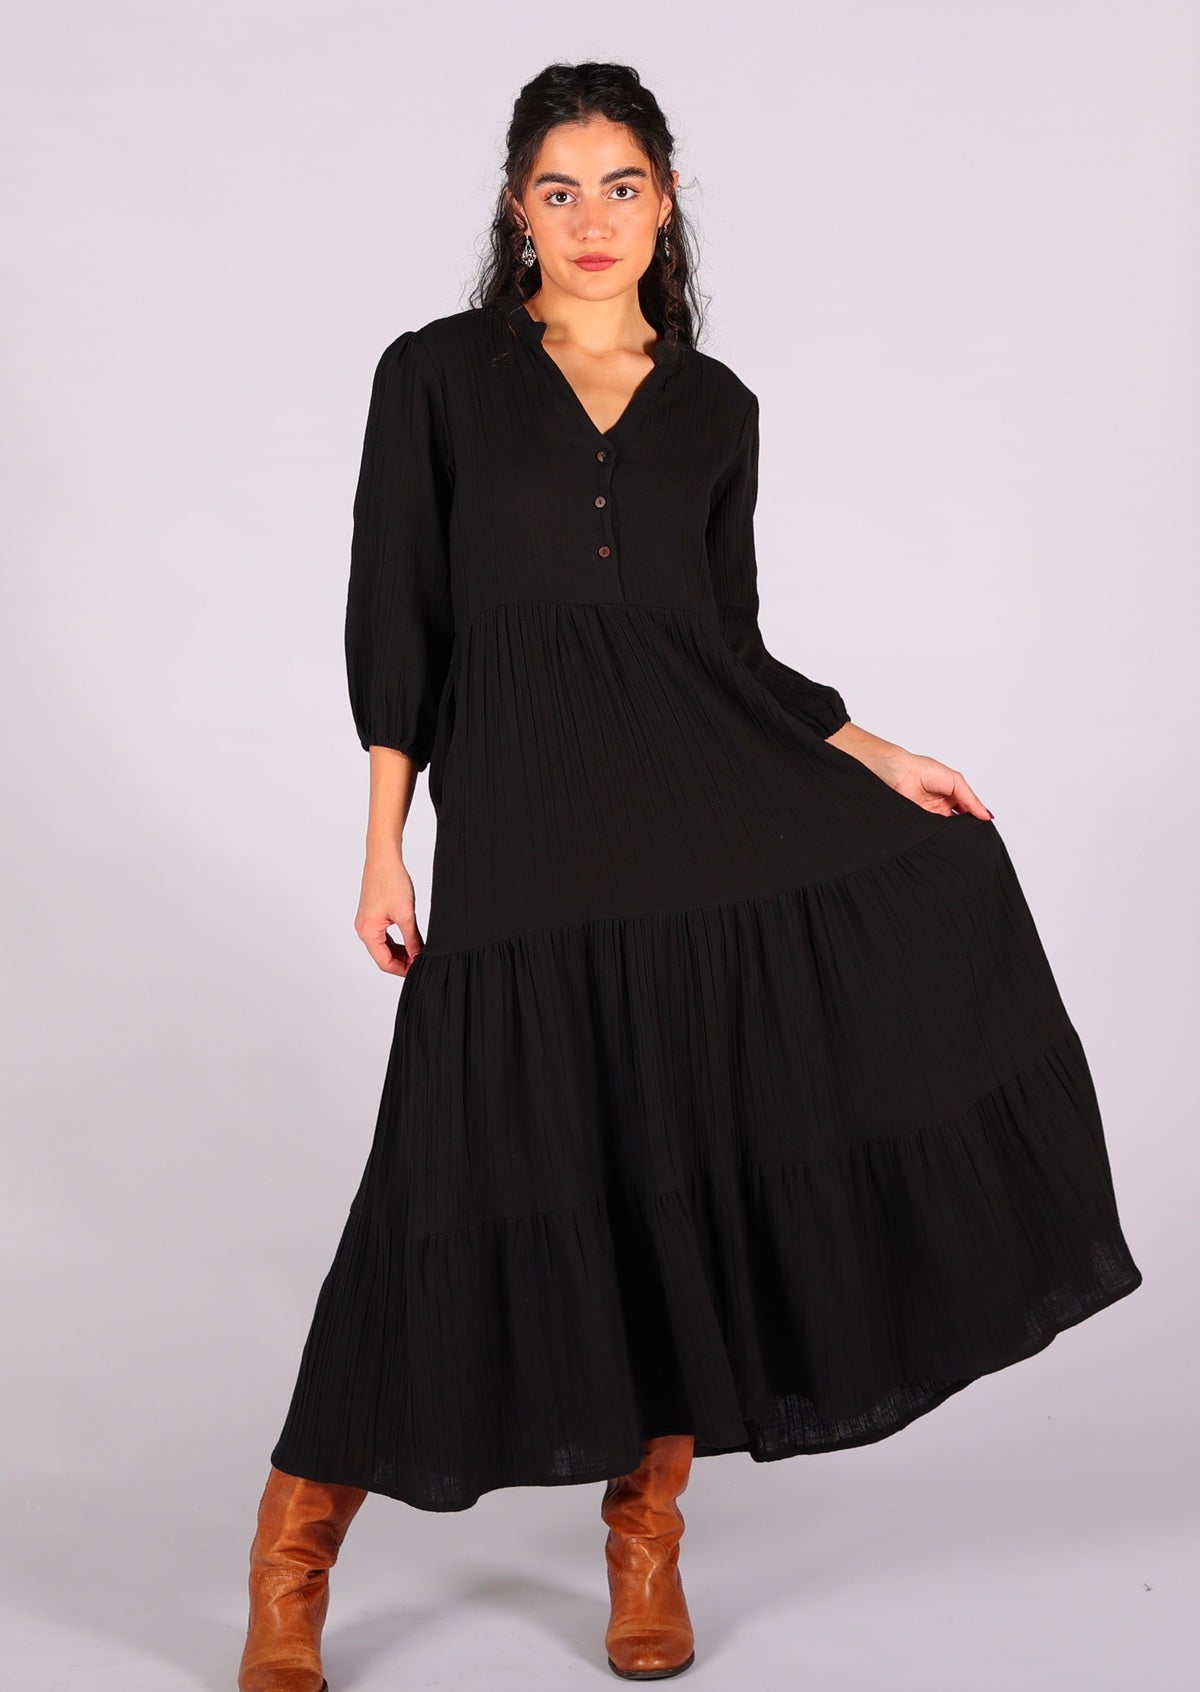 Double cotton maxi dress with tiers gives this dress volume